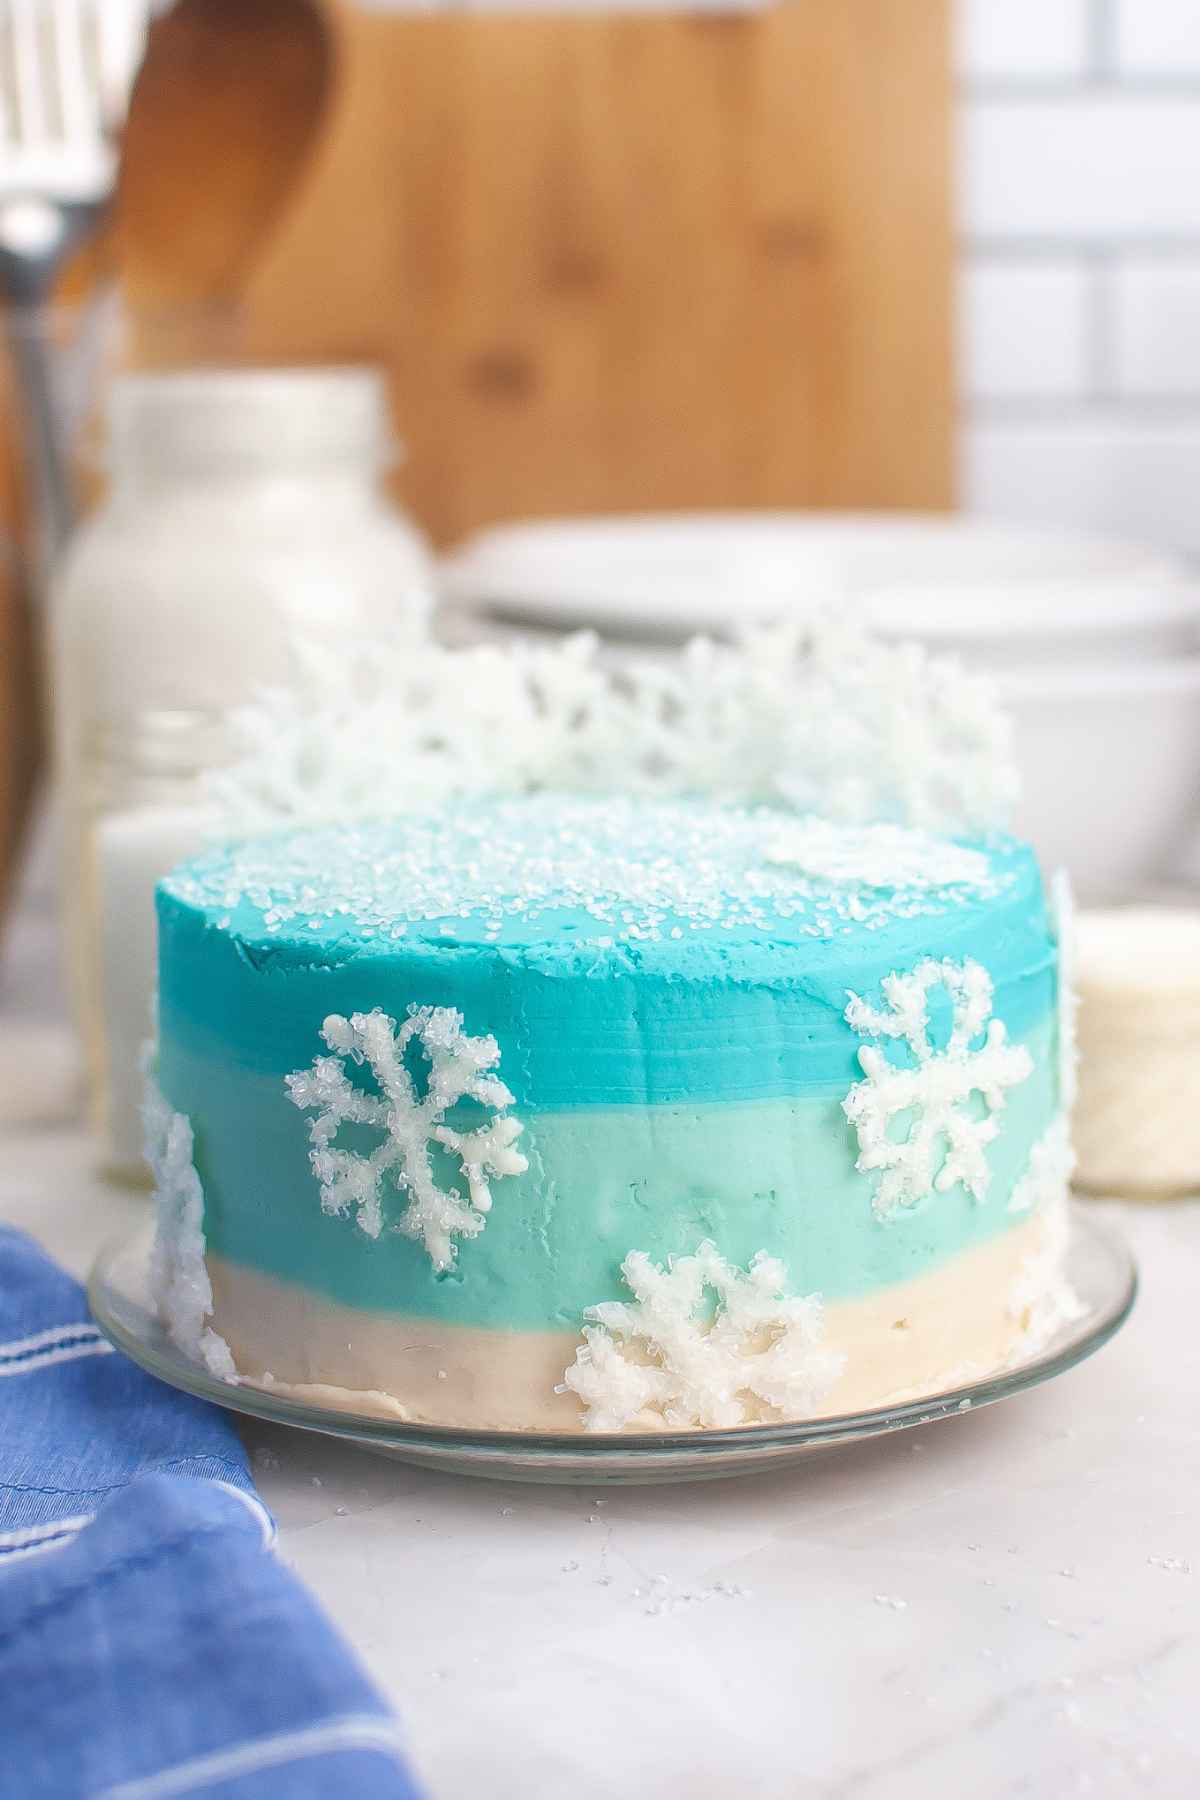 Side view of a layer cake with blue ombre frosting, and sugar glitter white chocolate frosting decorations.